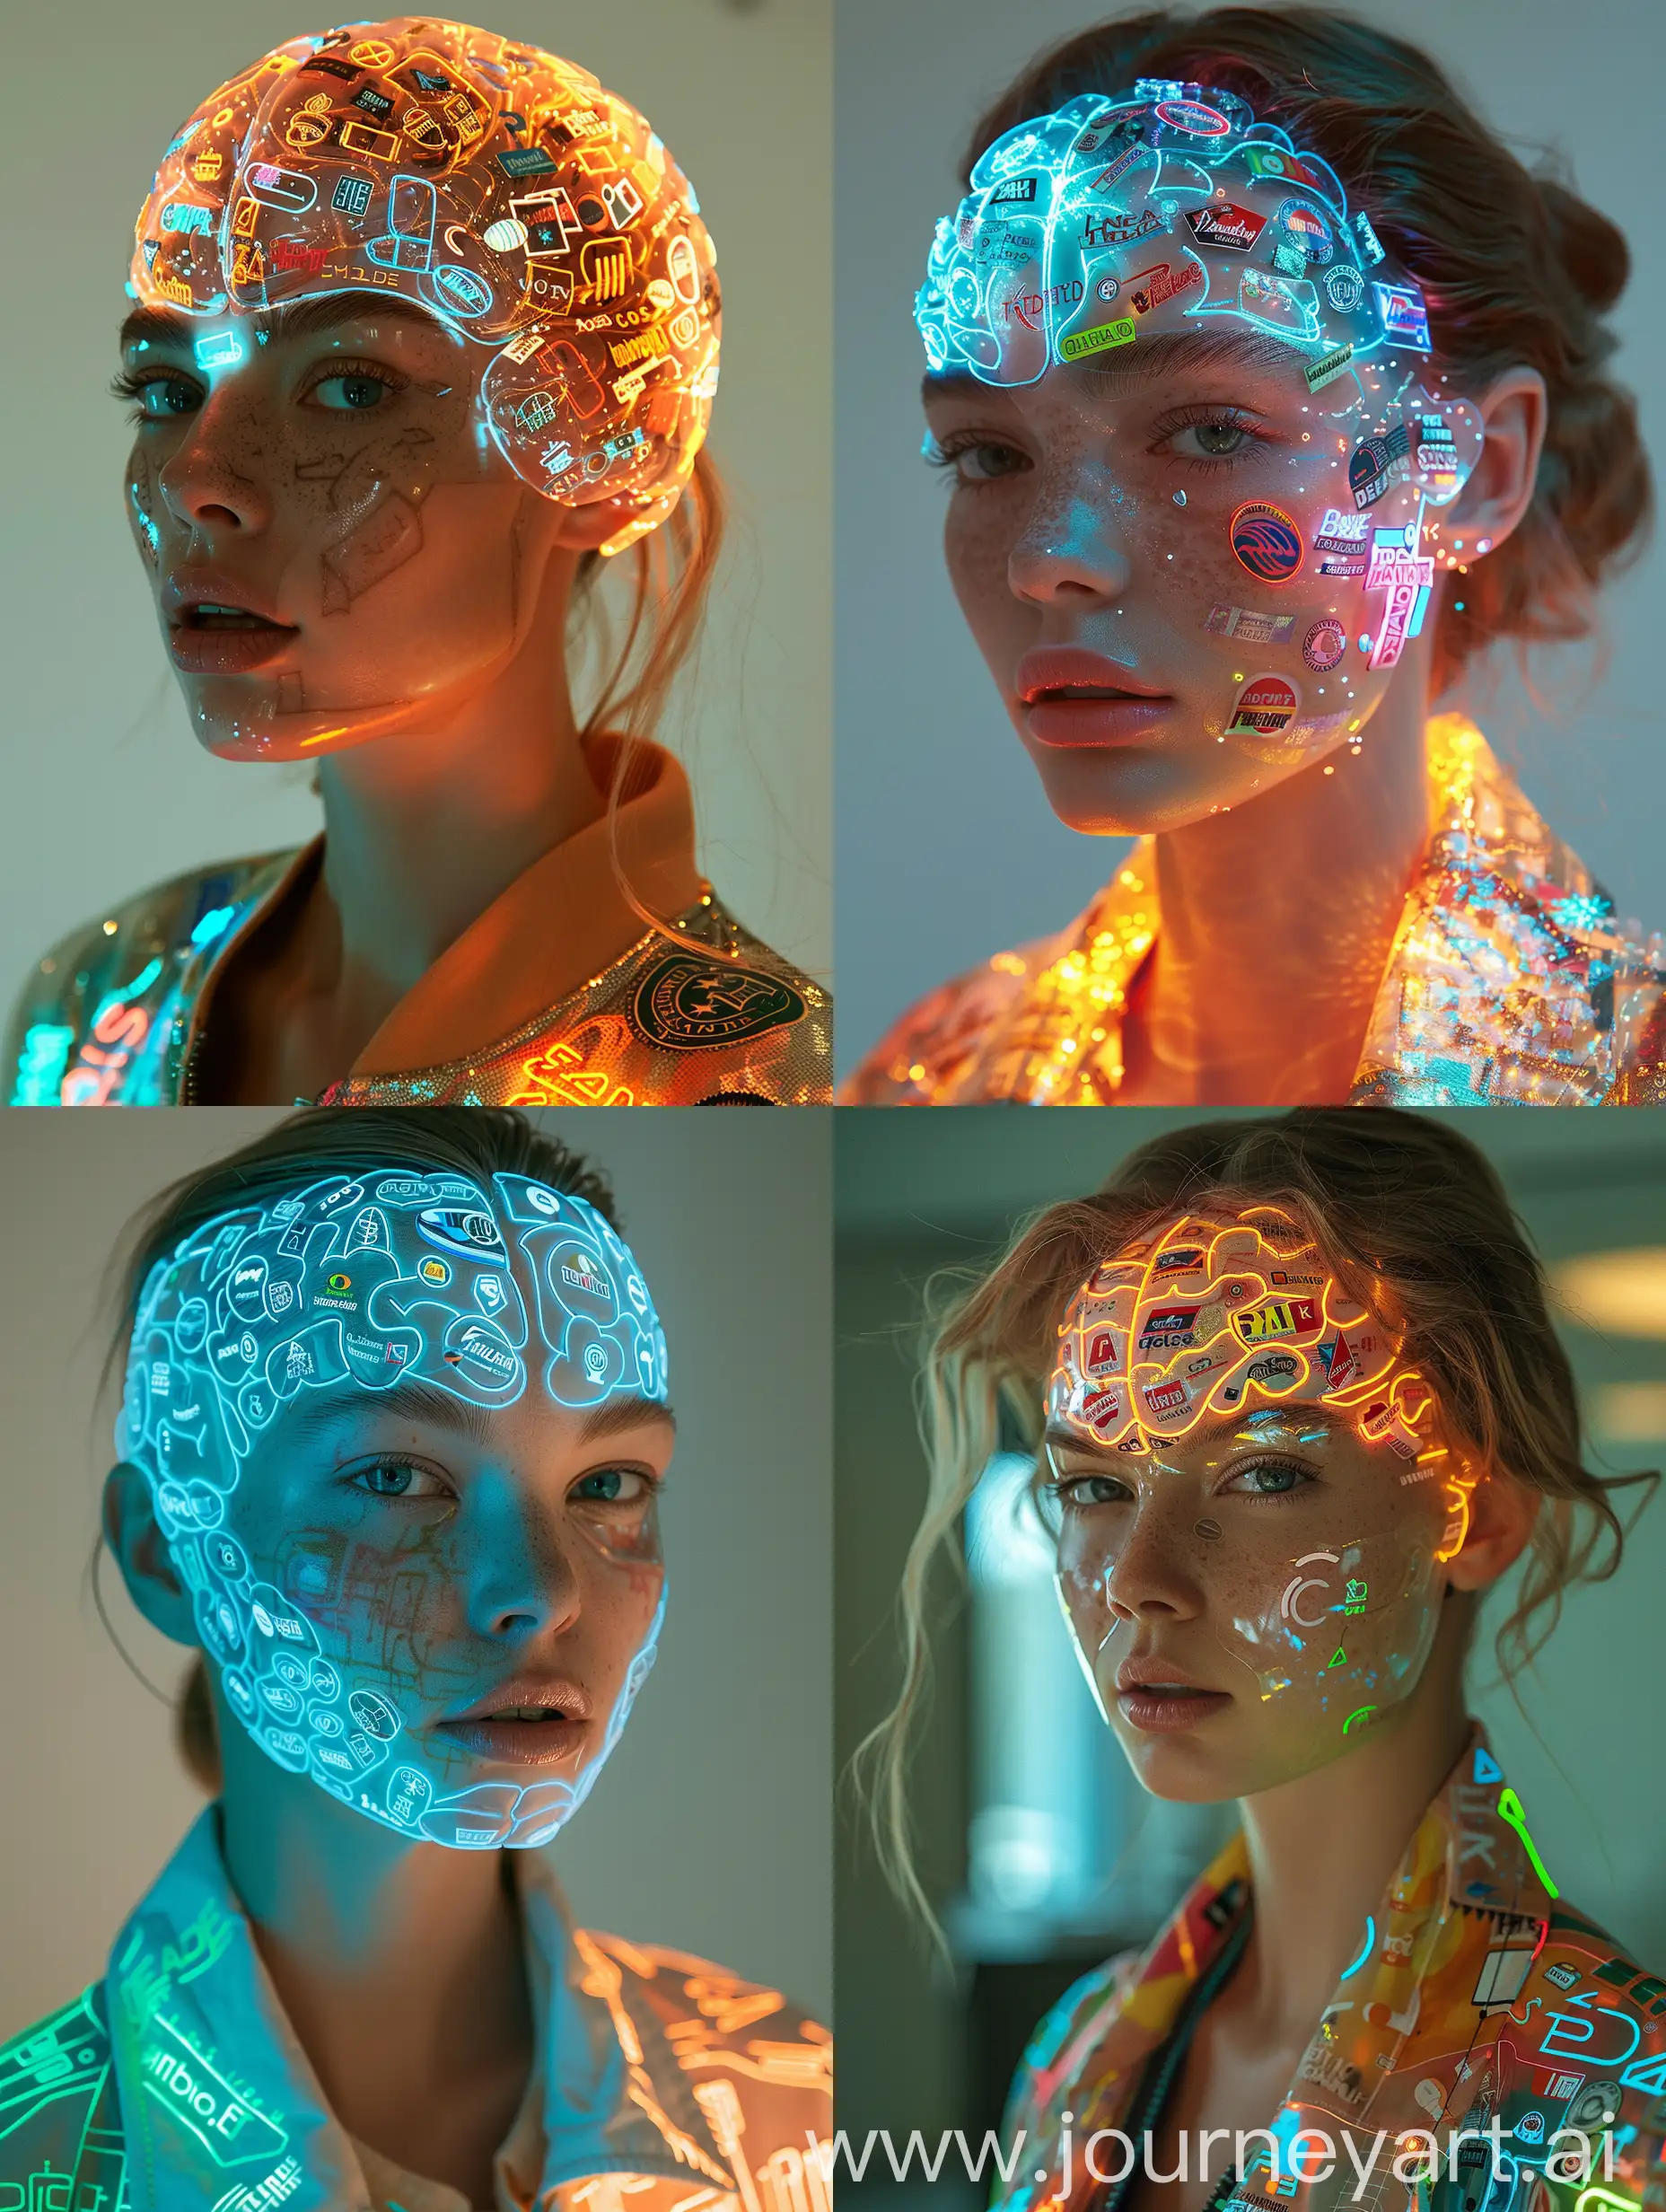 Neon-Brain-Fashion-White-Woman-with-Elaborate-Brain-Filled-with-Brand-Logos